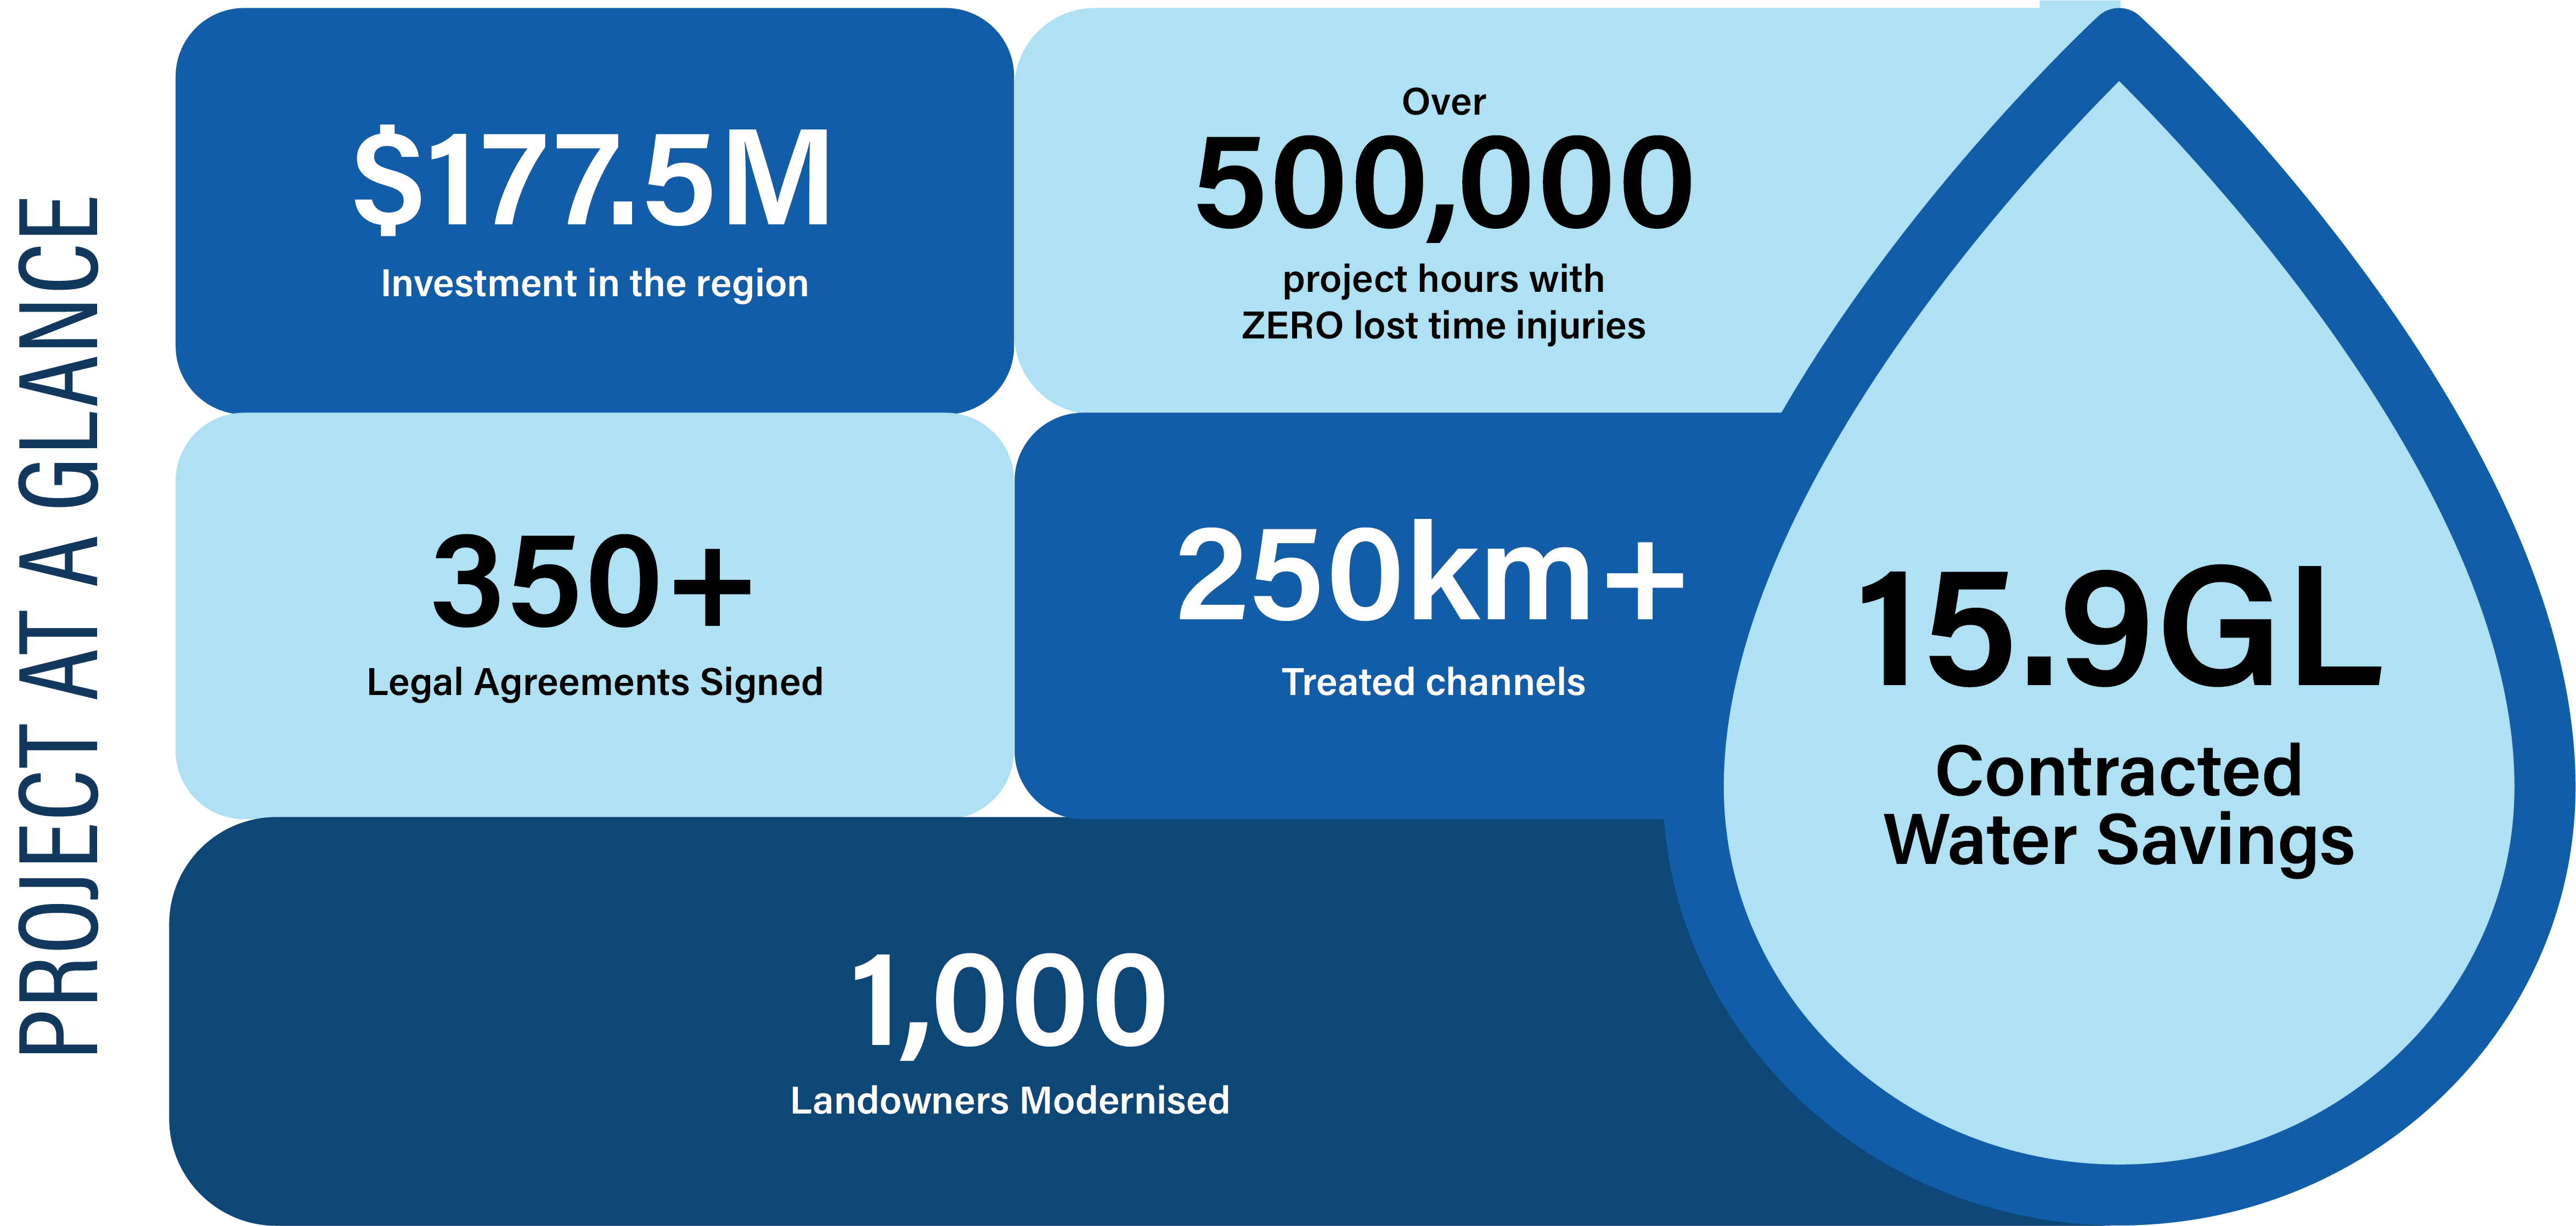 An image showing the WEP Project at a Glance - $177.5 million investment in the region, over 500,000 project hours with zero lost time injuries, 350+ legal agreements signed, 250km+ channels treated, 1000 landowners modernised, 15.9GL contracted water savings